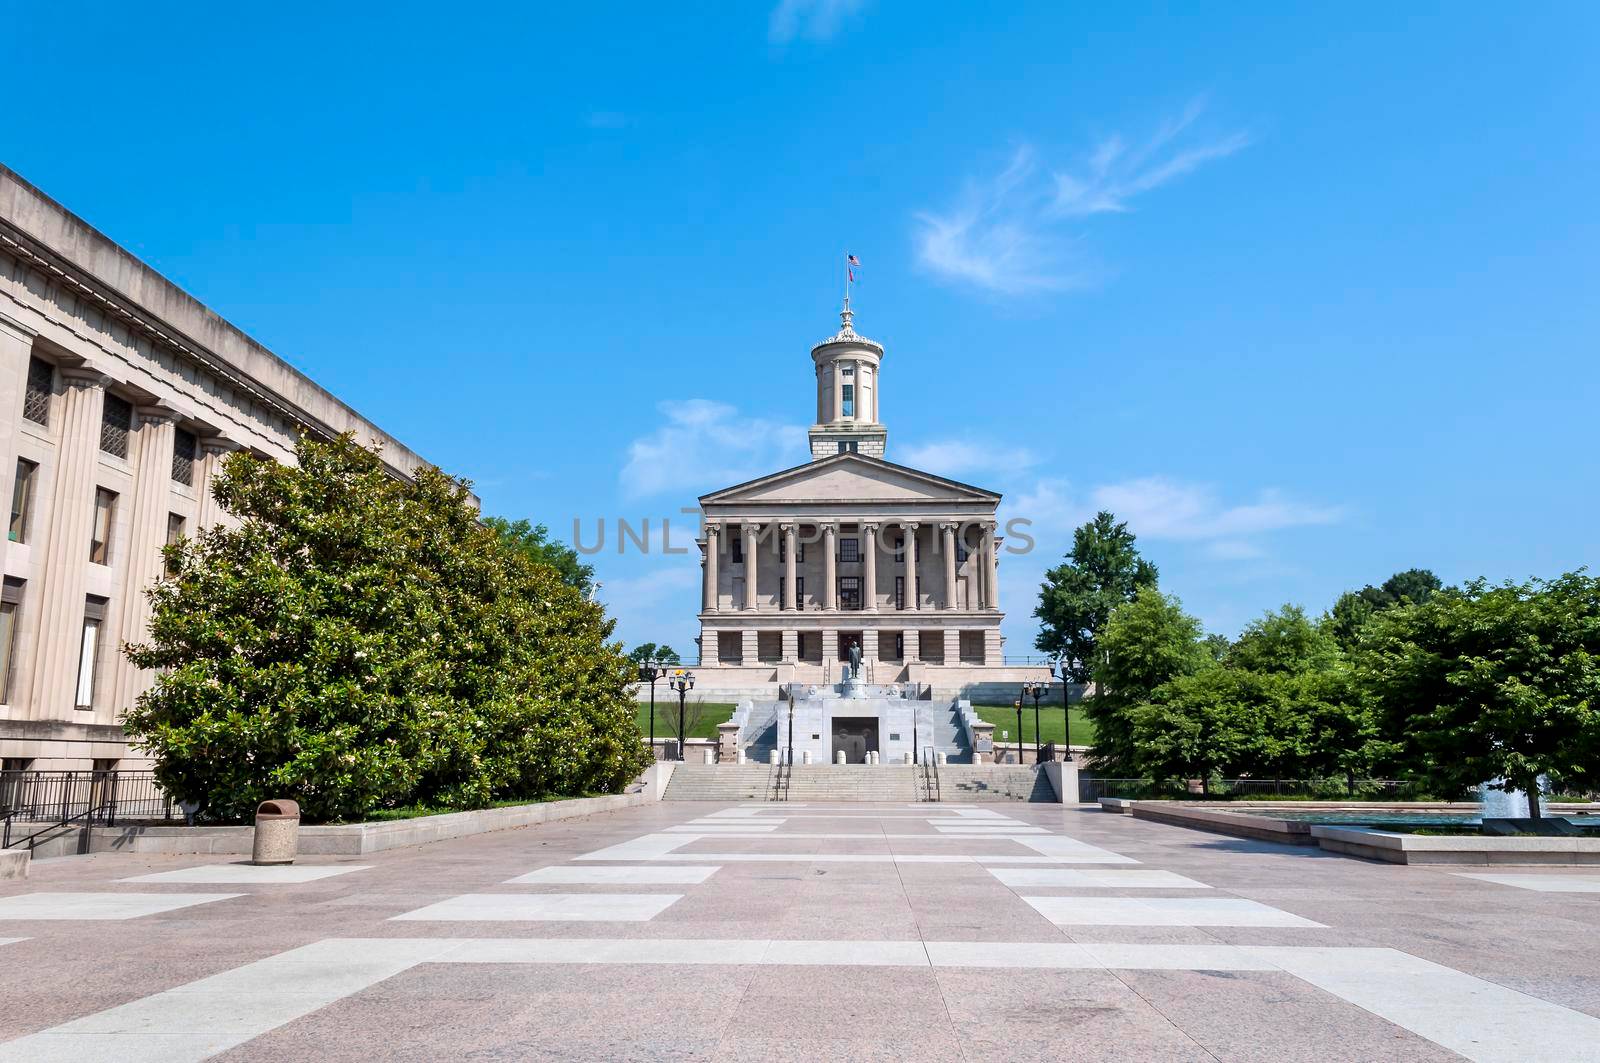 Tennessee State Capitol building in Nashville. by FER737NG